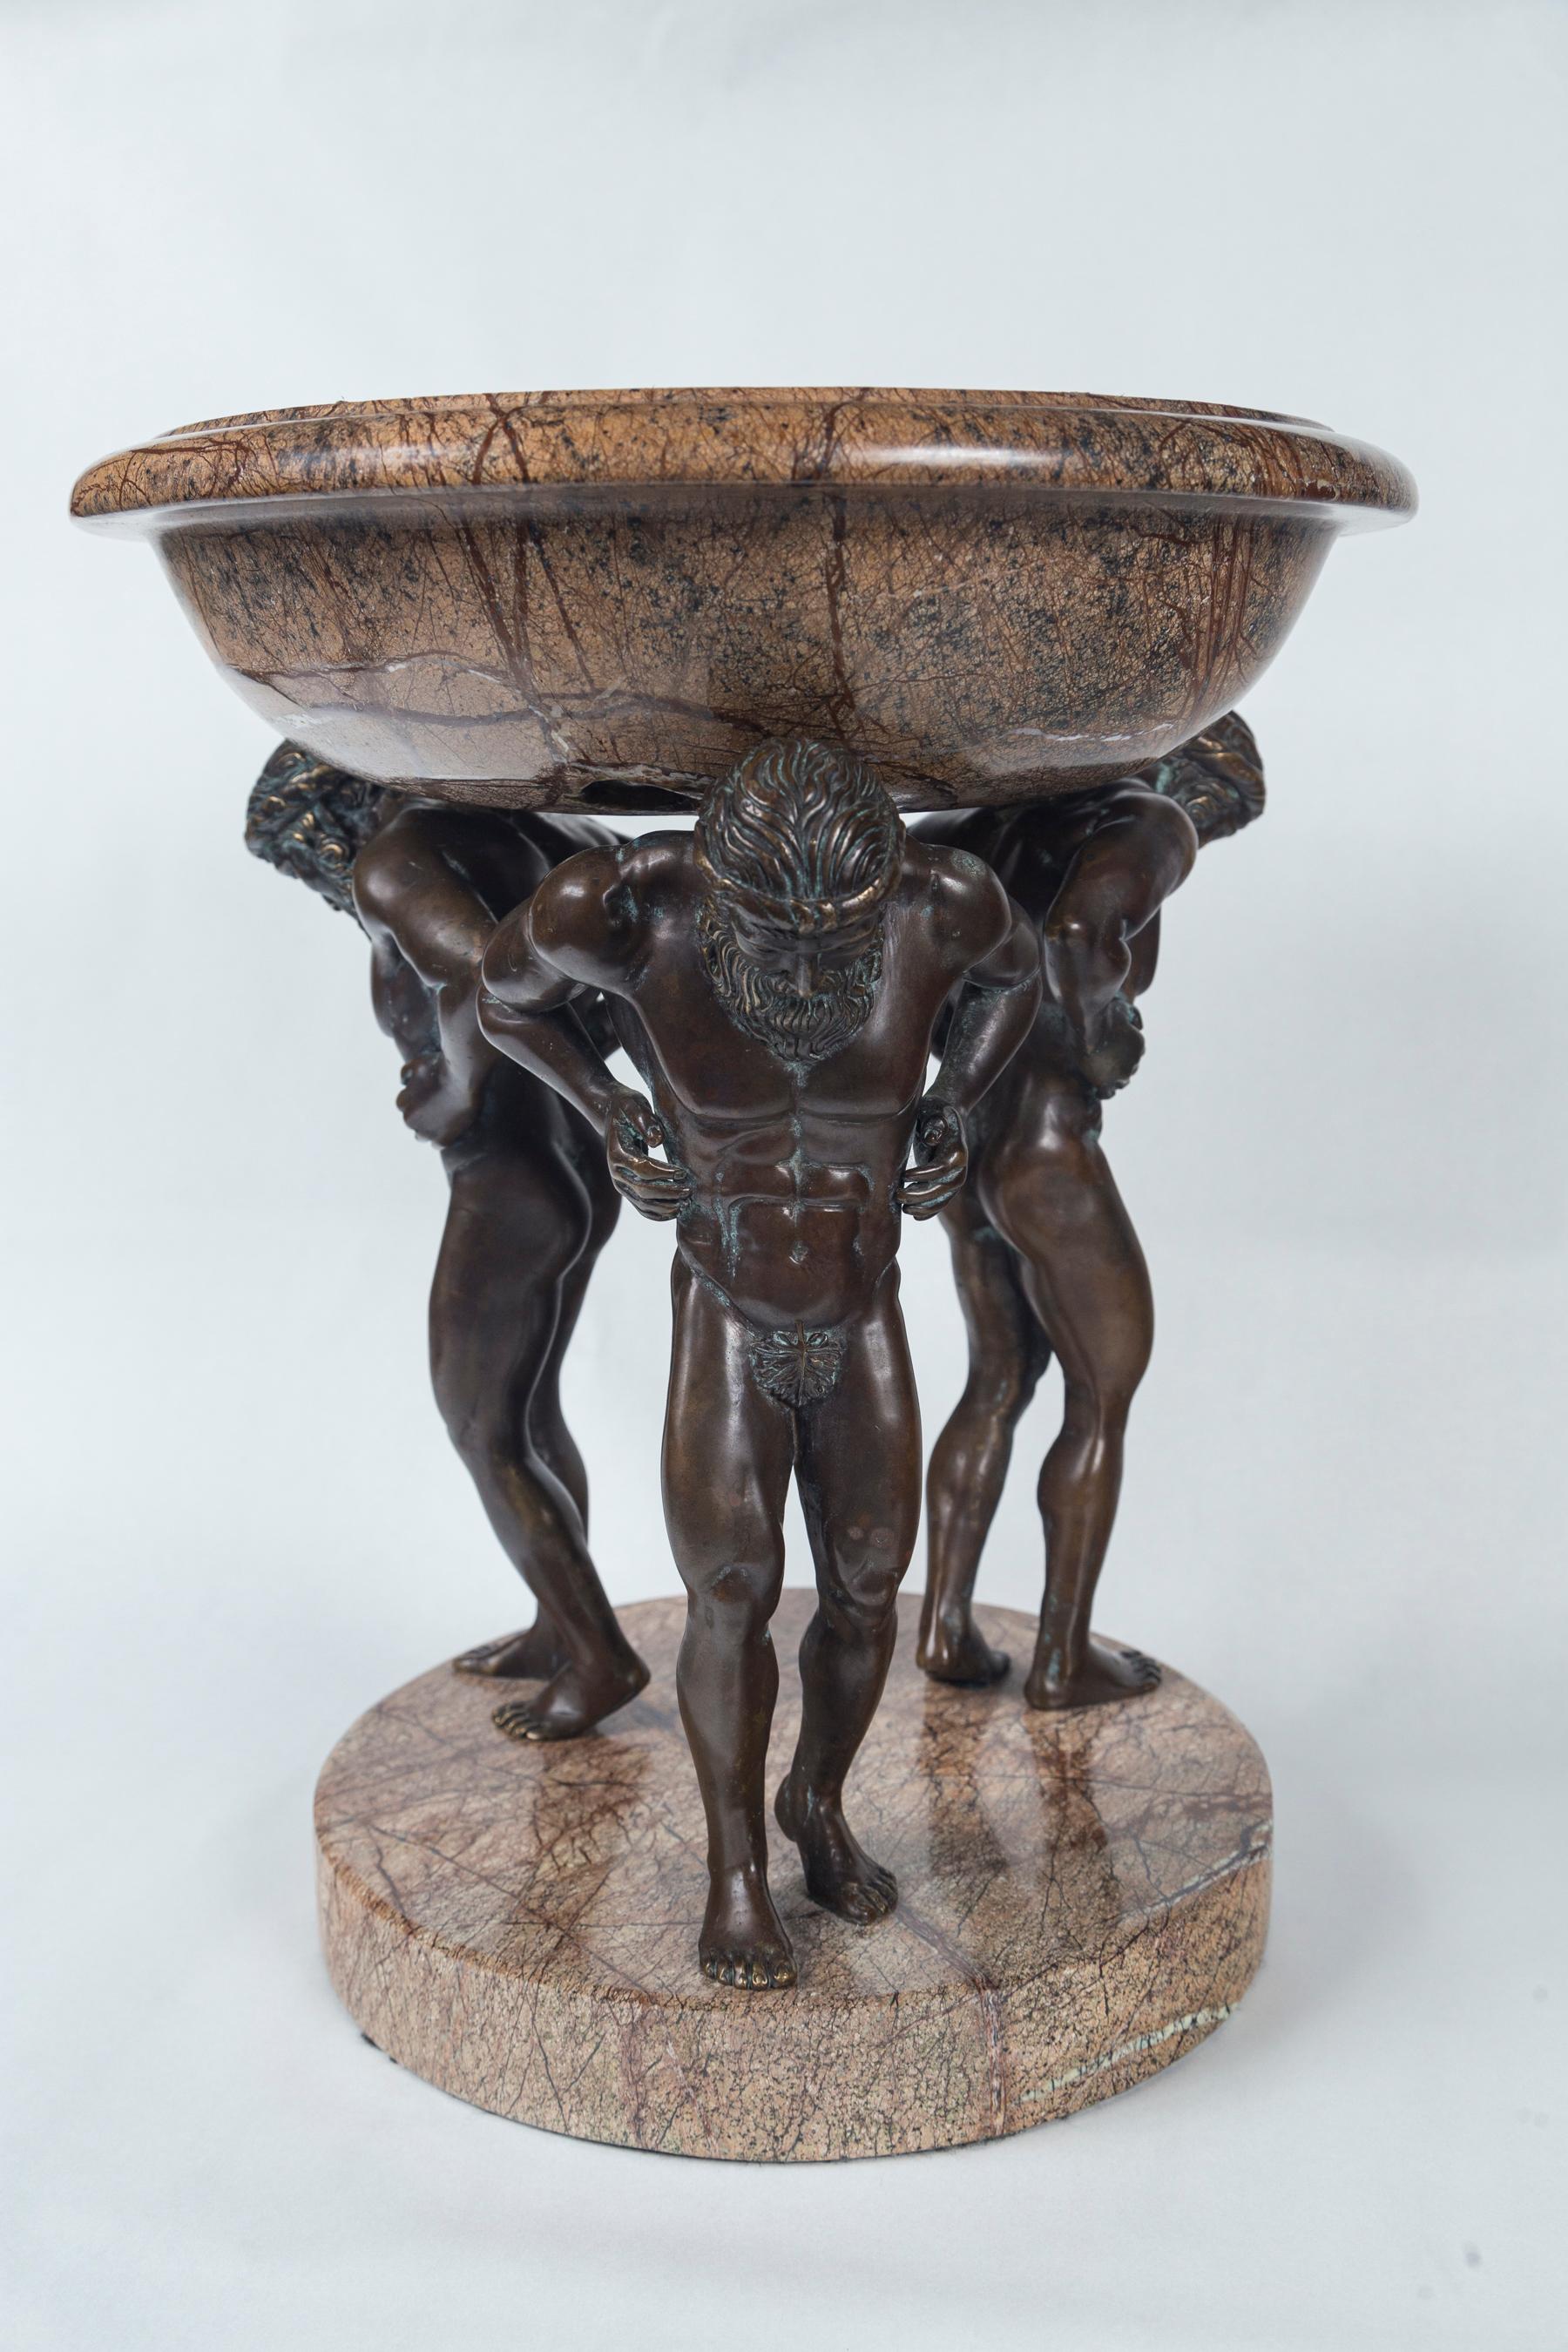 The separate bowl of light and darker brown  synthetic marble sits atop the hunched figures of Herculean men of bronze.  The bronze  figures  predate  the  synthetic faux  marble.  They are  19th century
The base is 10 inches in diameter, while the